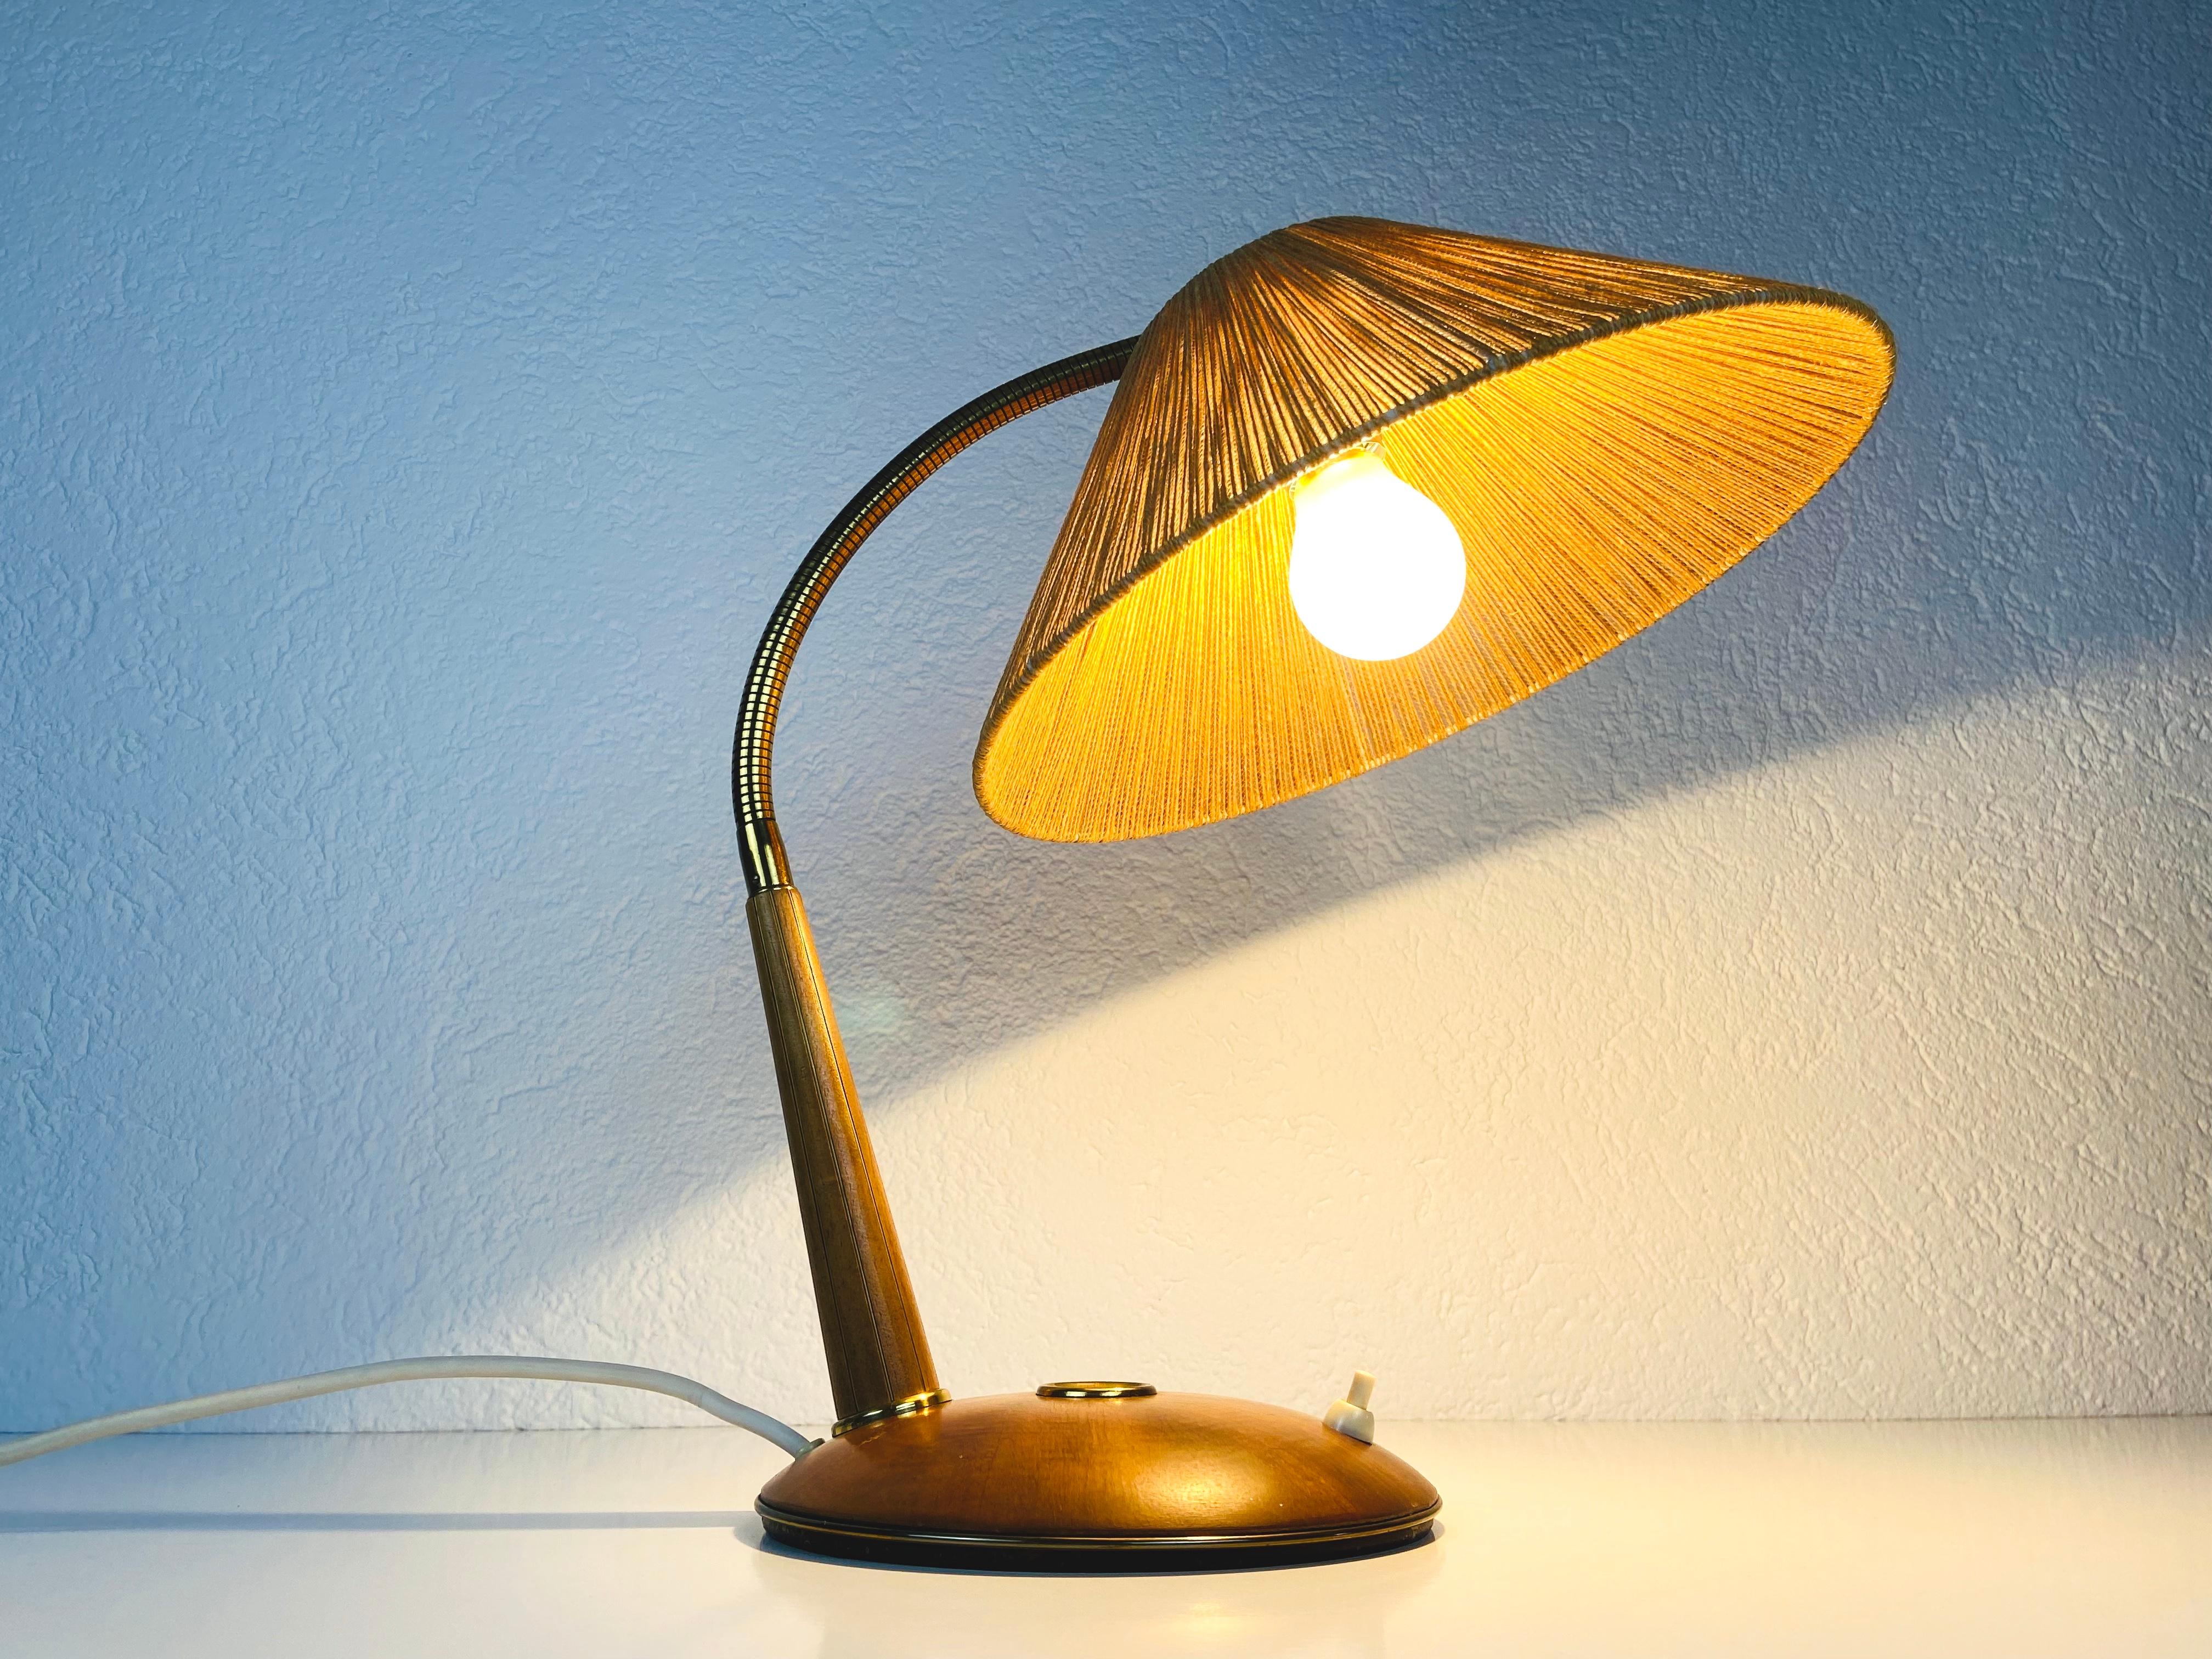 Midcentury Teak and Rattan Table Lamp by Temde, circa 1970 For Sale 15